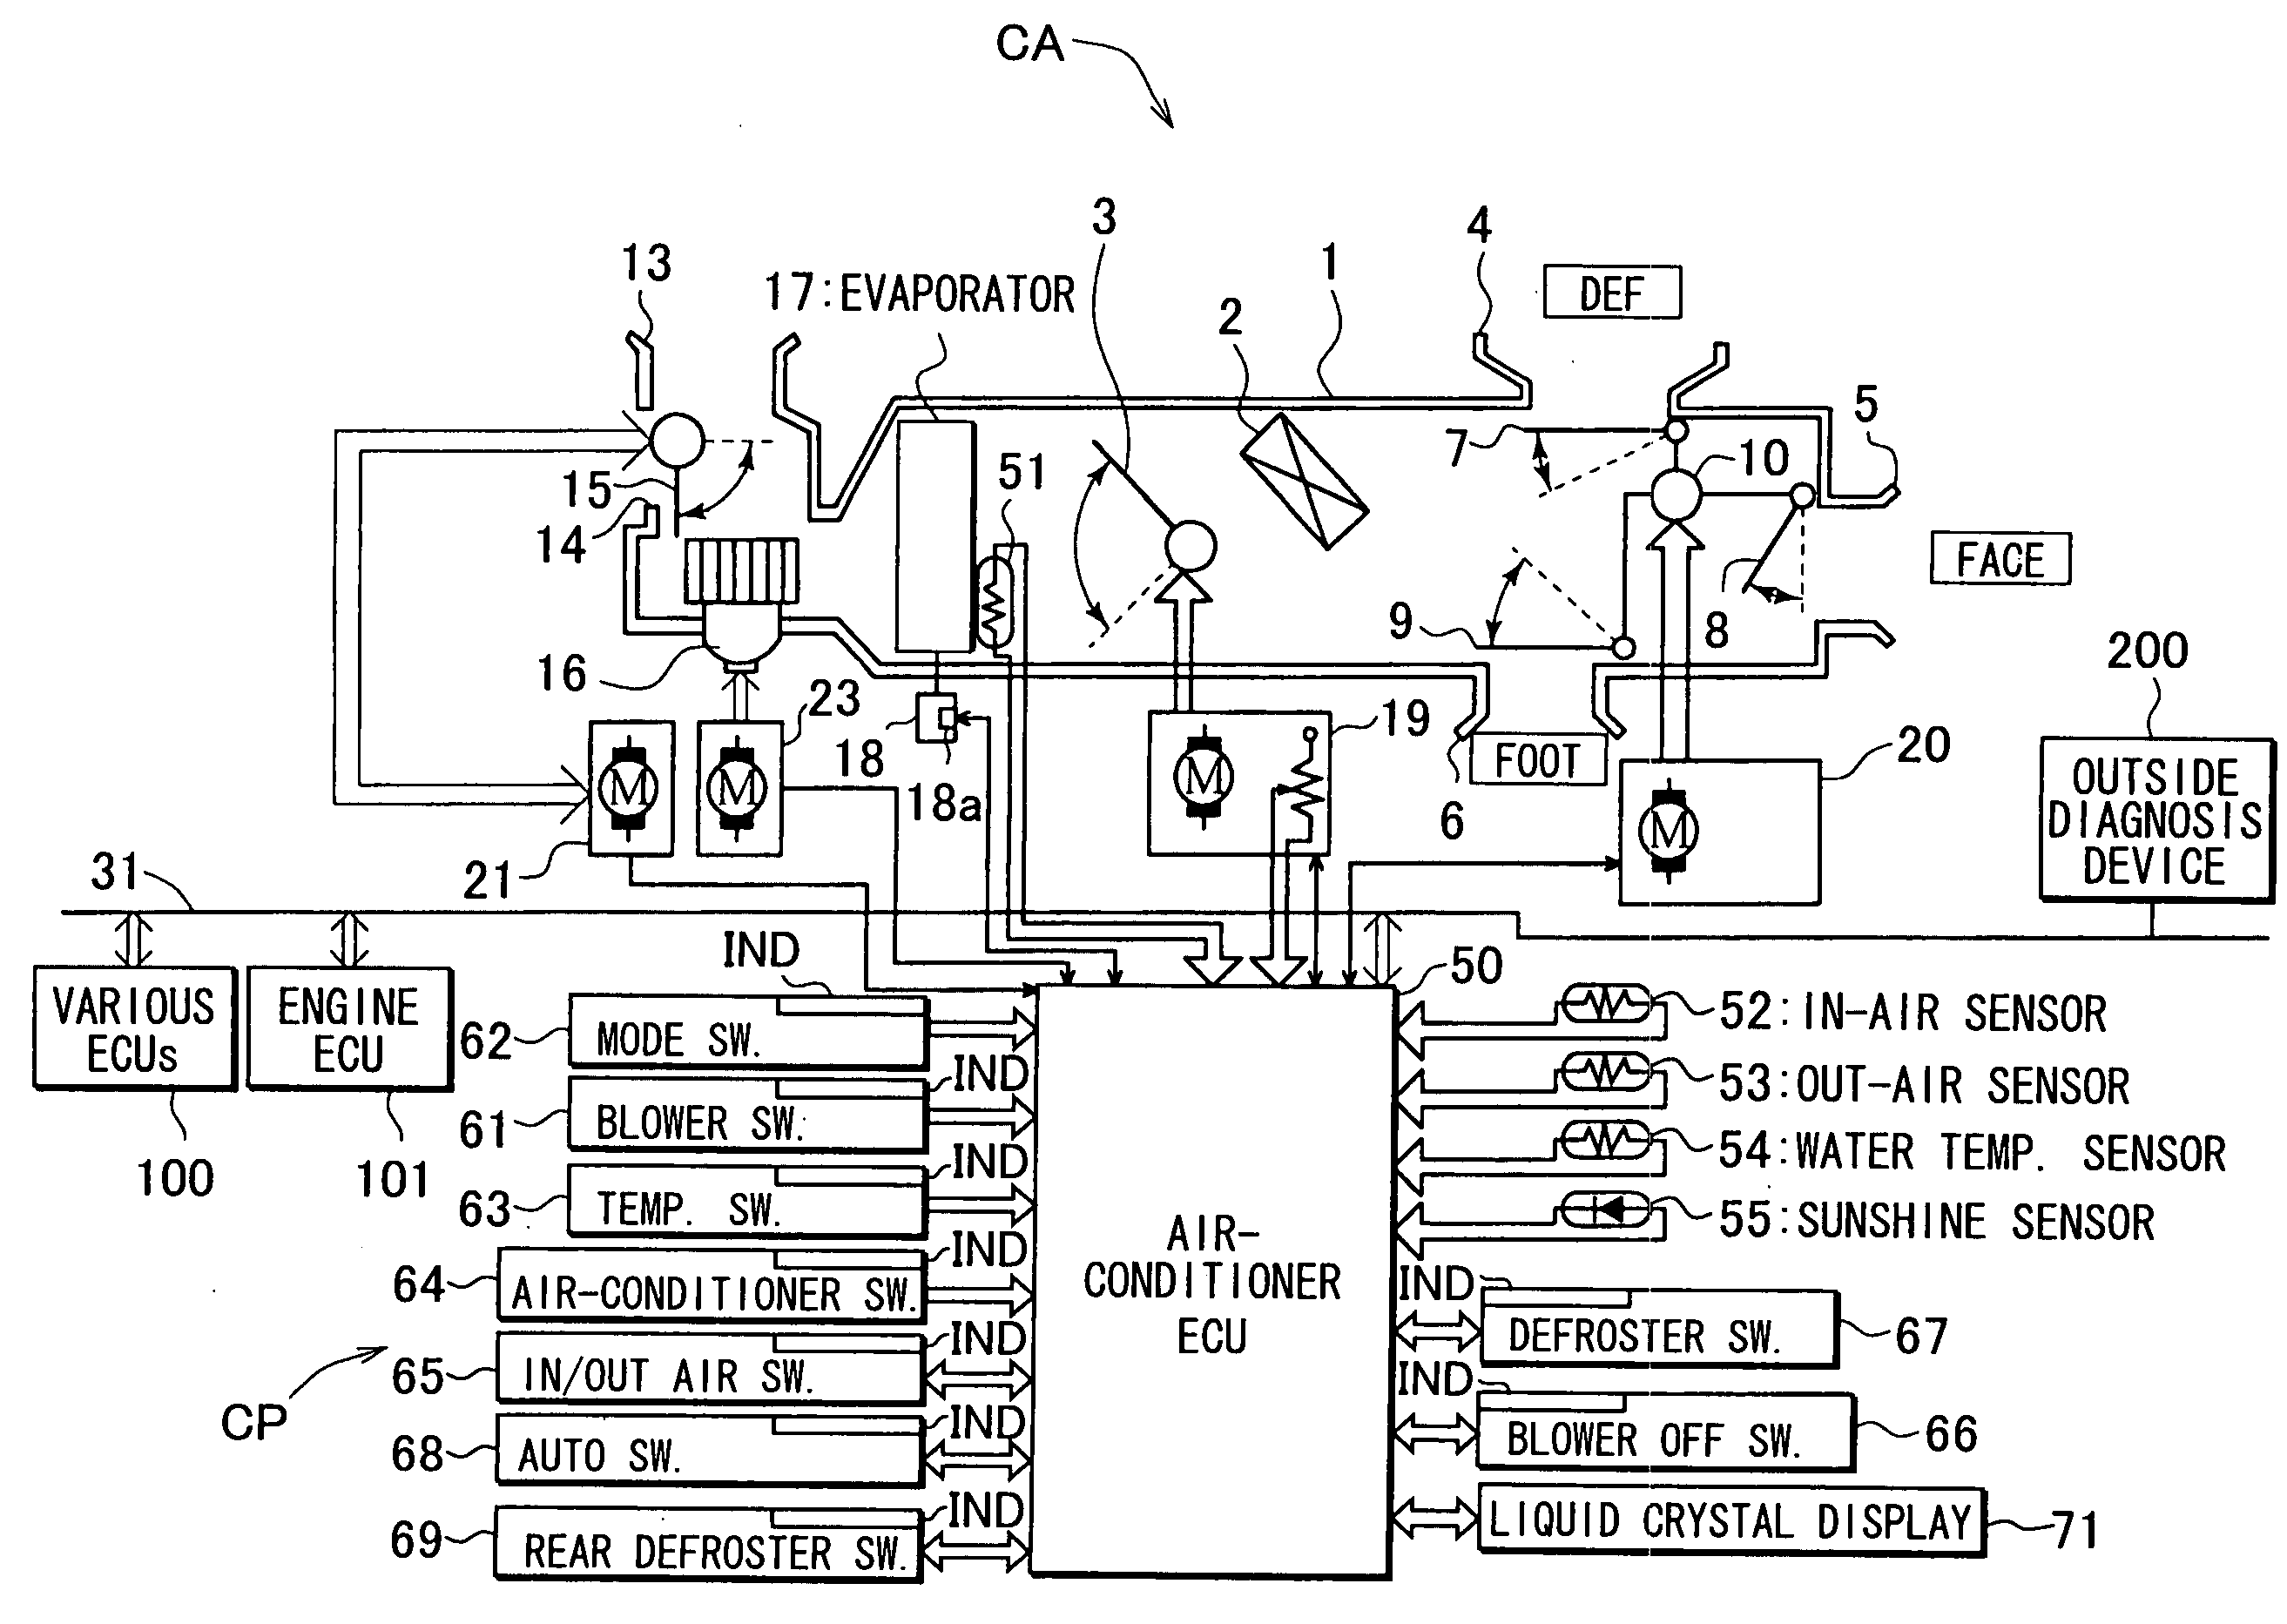 Control system for automotive vehicle having diagnosis function